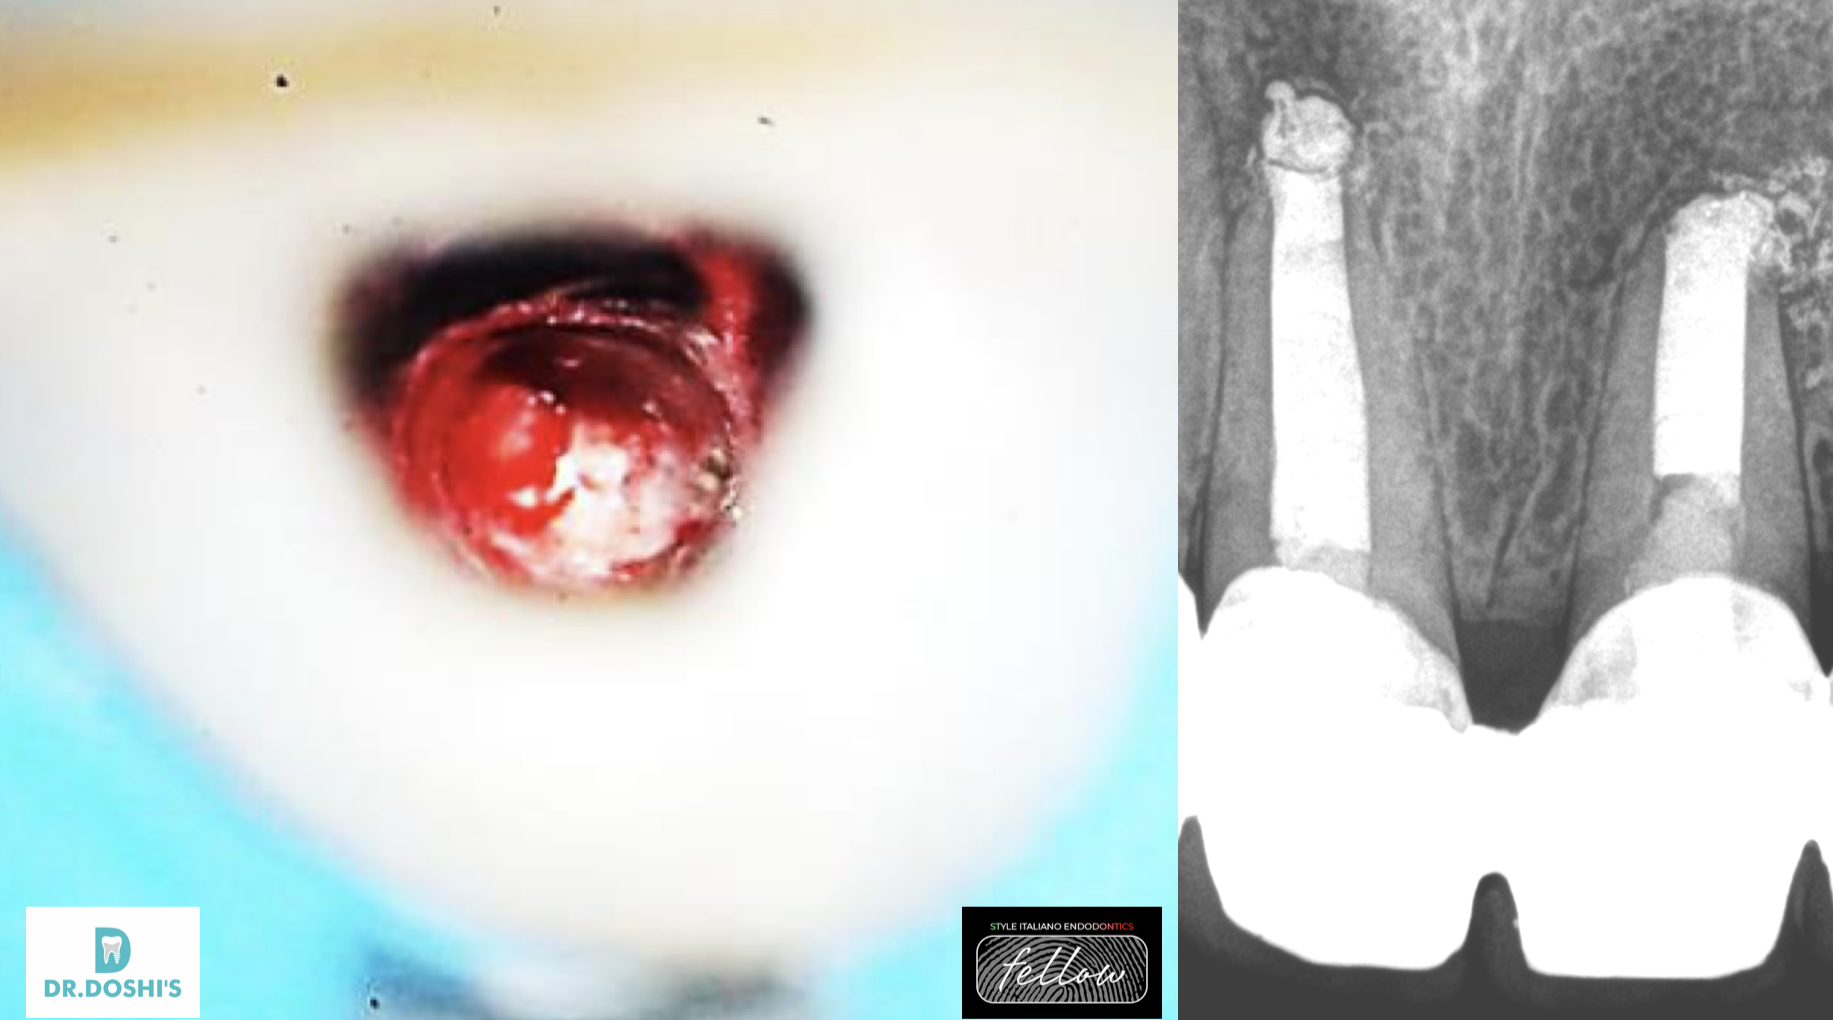 Management of Immature Permanent Incisors with wide open apex